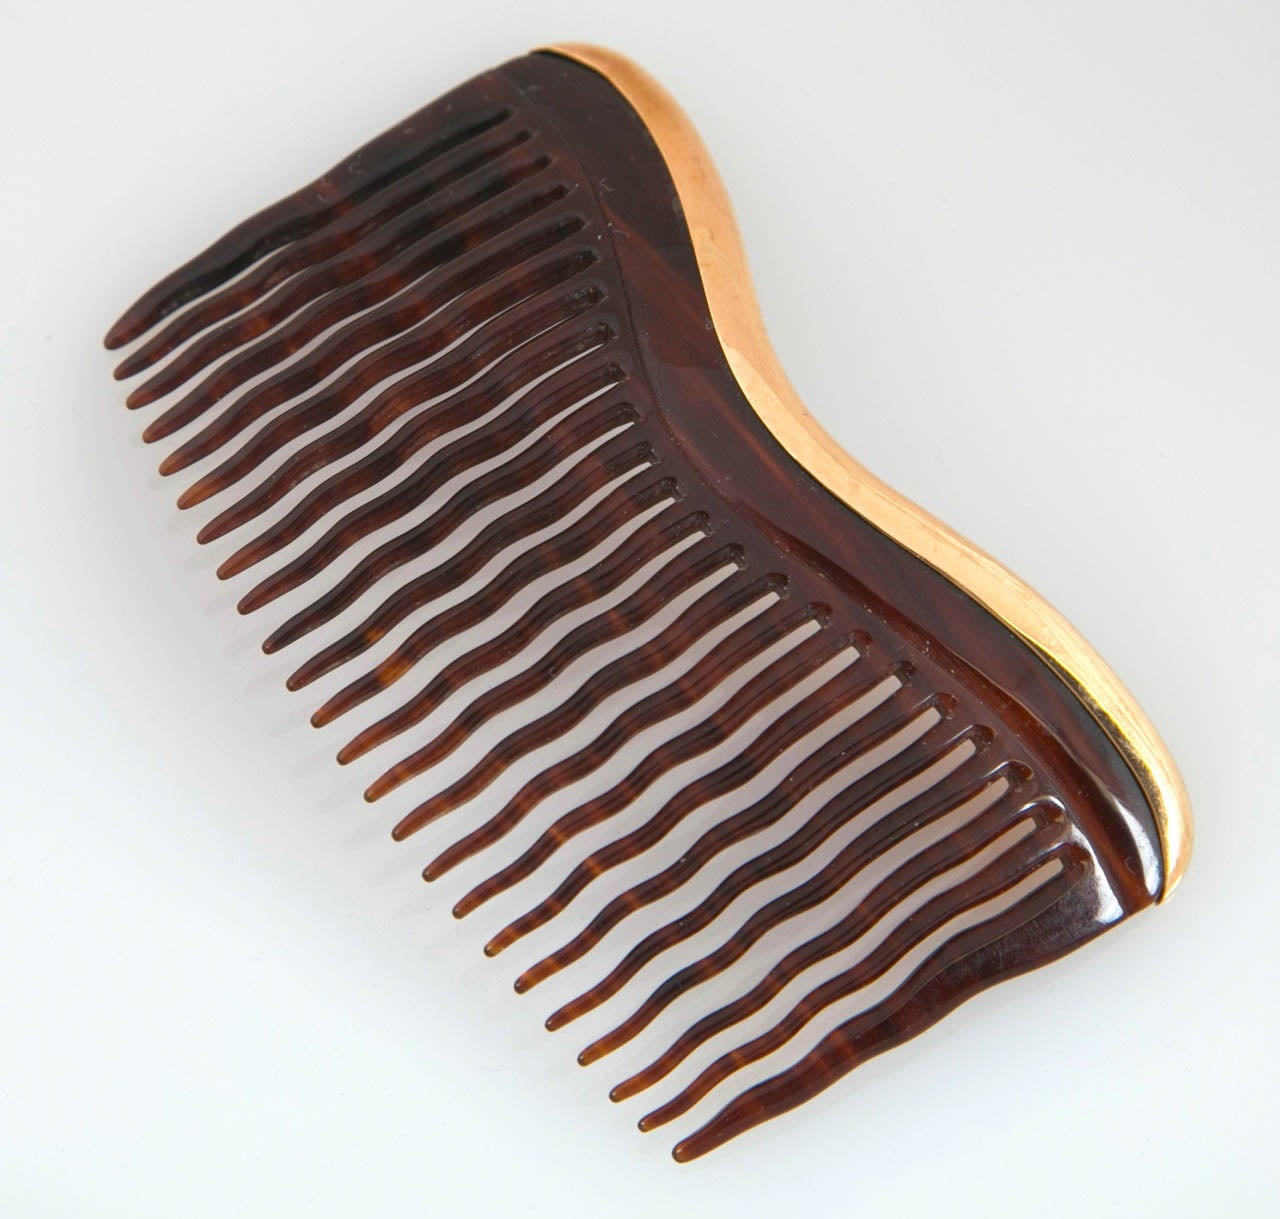 Tiffany & Co. 14kt gold and tortoise comb. Made in the 1920s. Size is 3 1/2